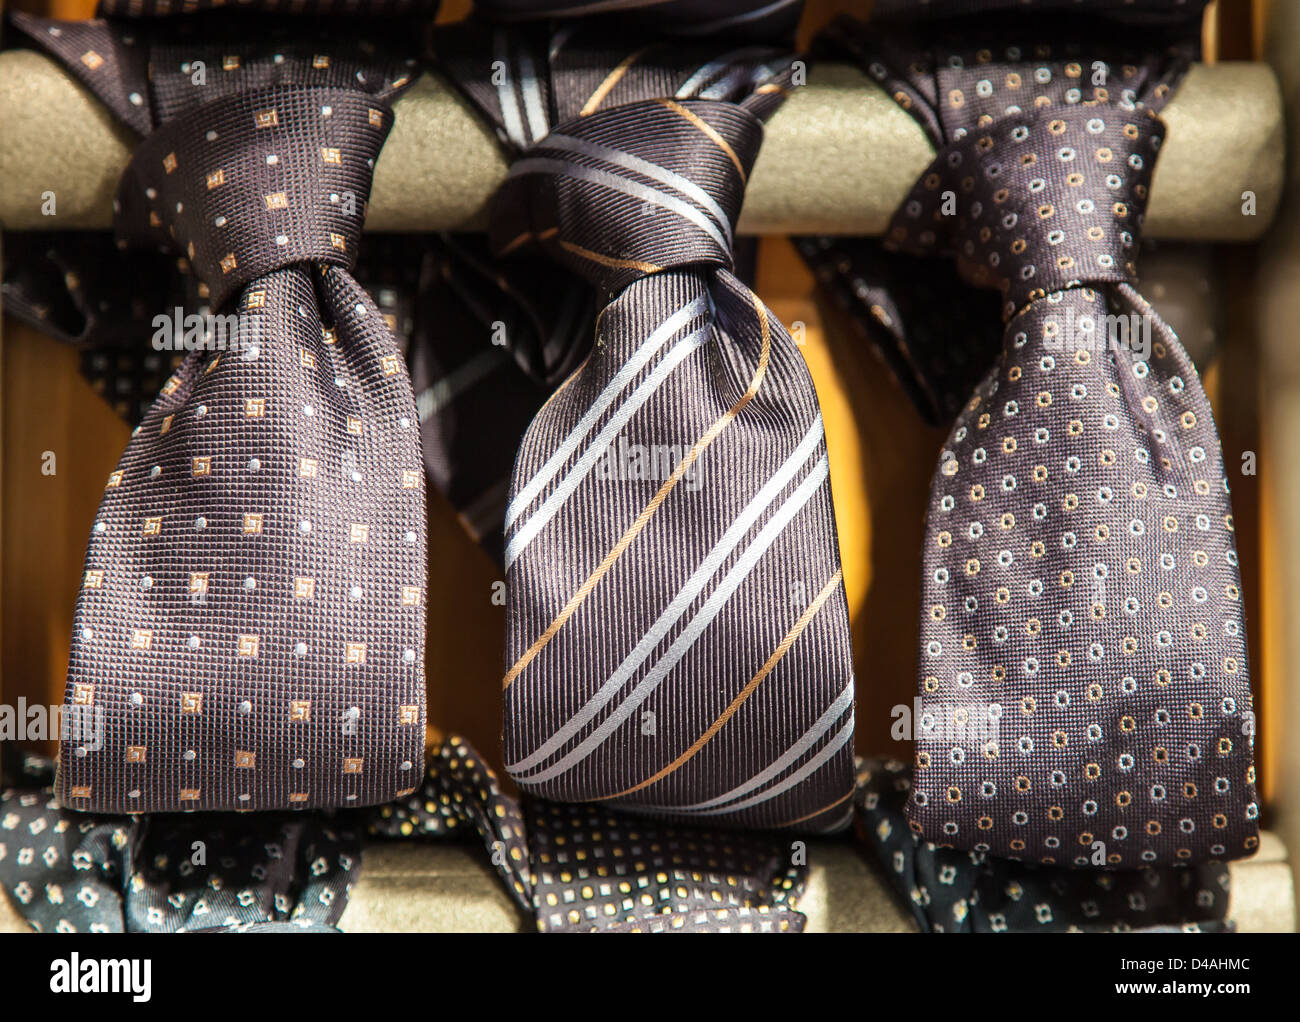 Milano - Italy. Detail of ties in a luxury shop Stock Photo - Alamy